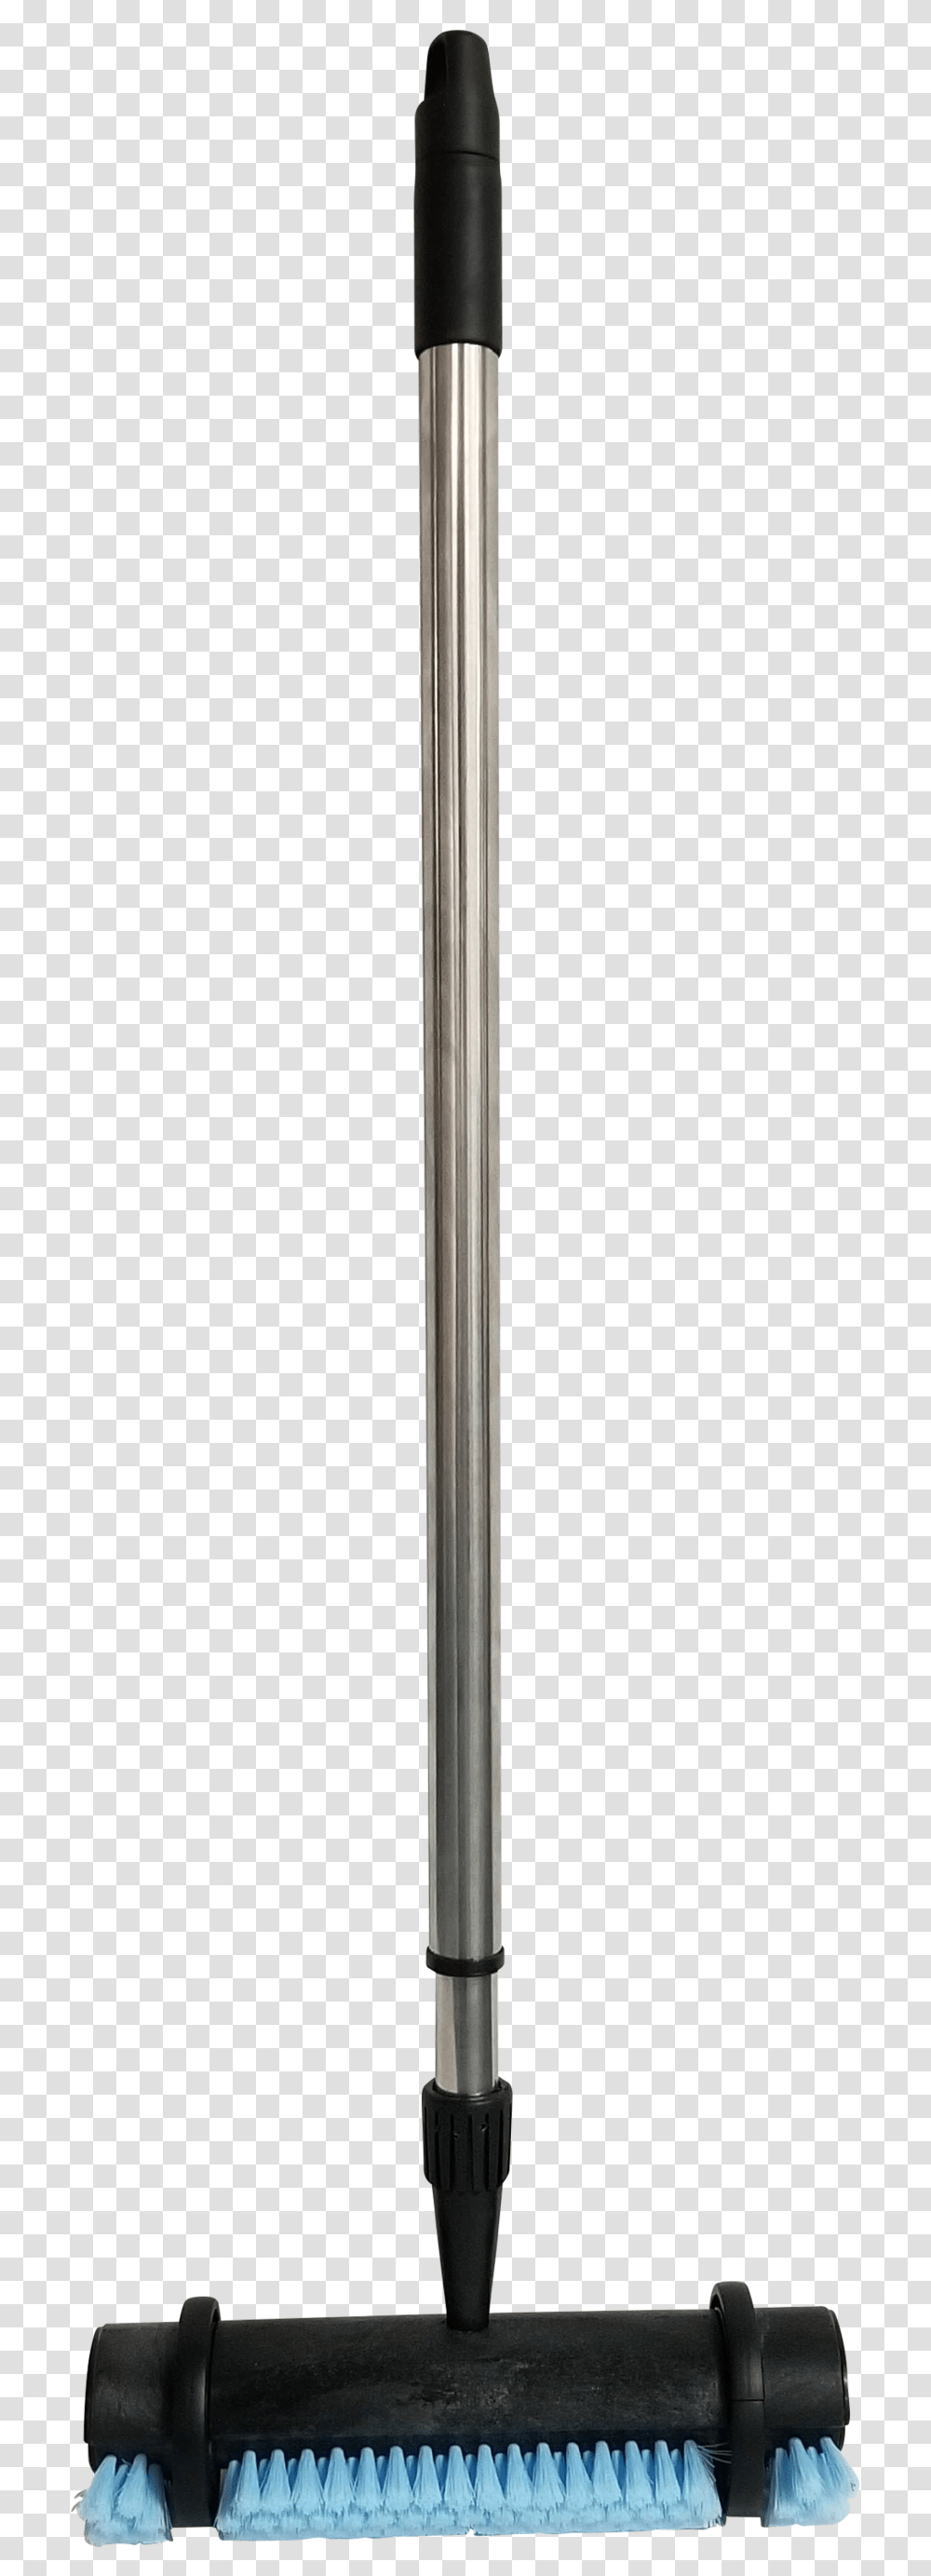 Moe Stick Mobile Phone, Sword, Blade, Weapon, Weaponry Transparent Png